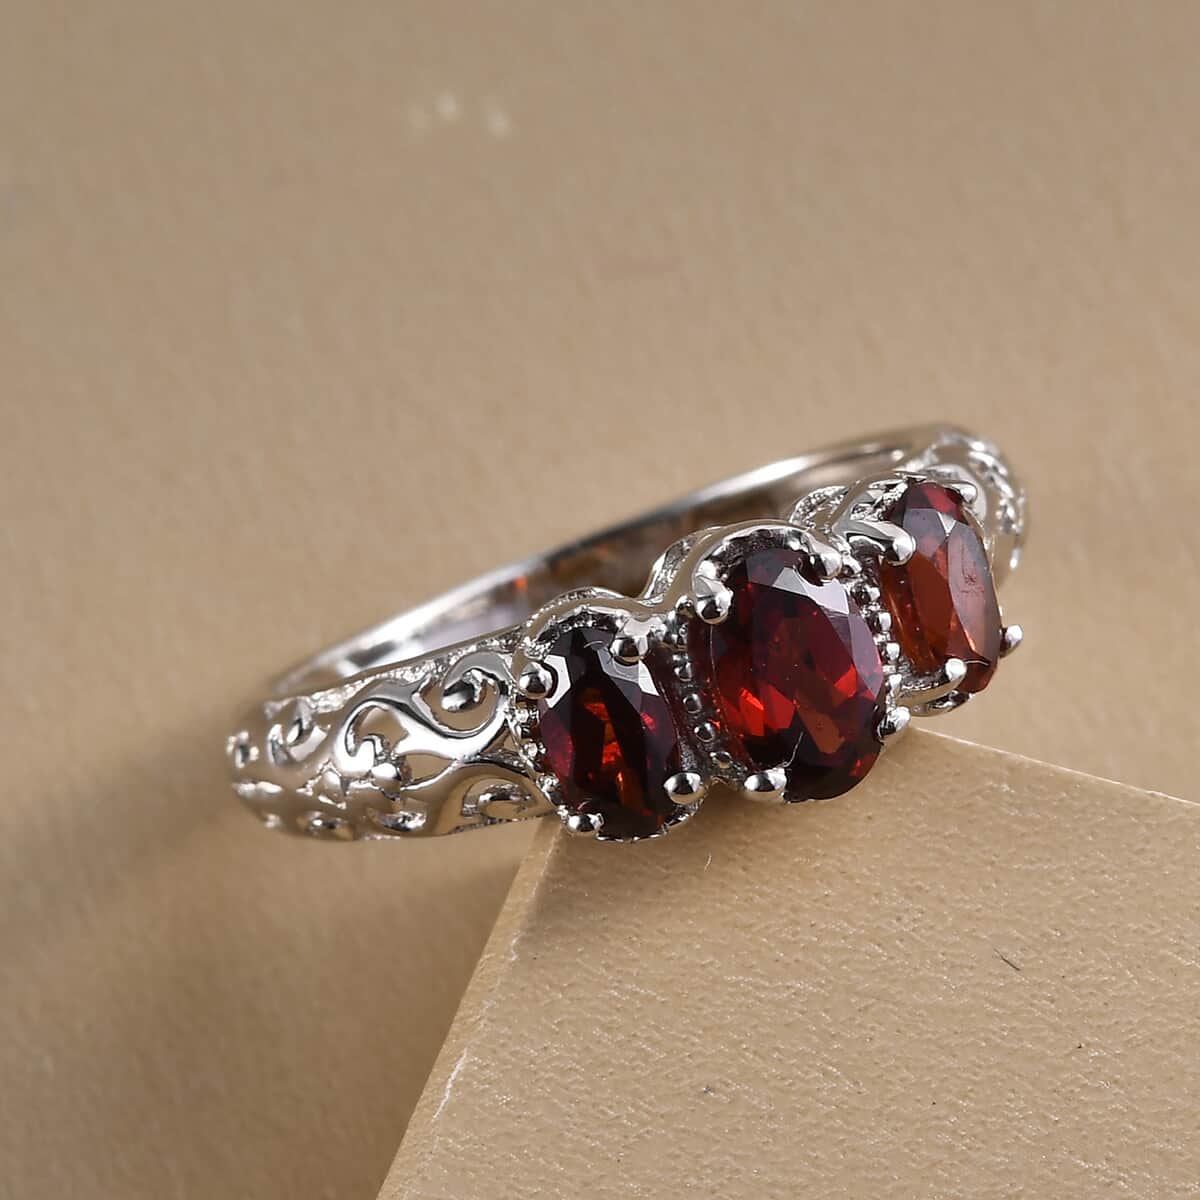 Garnet Ring, 3 Stone Garnet Ring, Trilogy Ring, Sterling Silver Ring, Birthstone Jewelry, Mozambique Garnet 3 Stone Ring 1.15 ctw (Size 7.0) image number 1